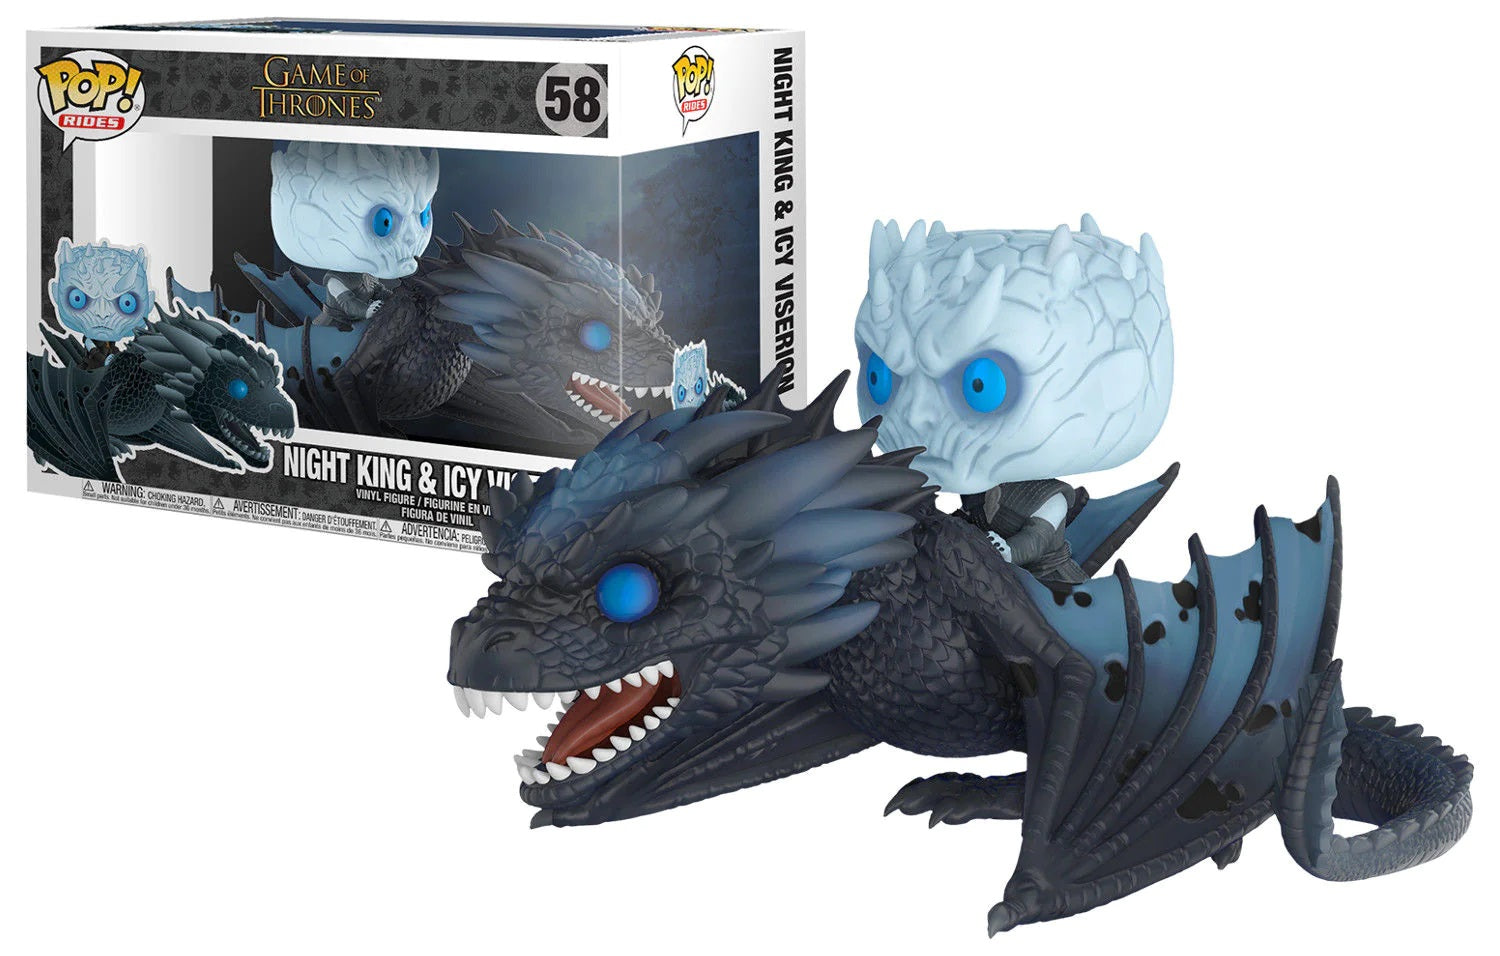 FUNKO POP THE NIGHT KING & ICY VISERION GAME OF THRONES VINYL FIGURE #58 - Anotoys Collectibles